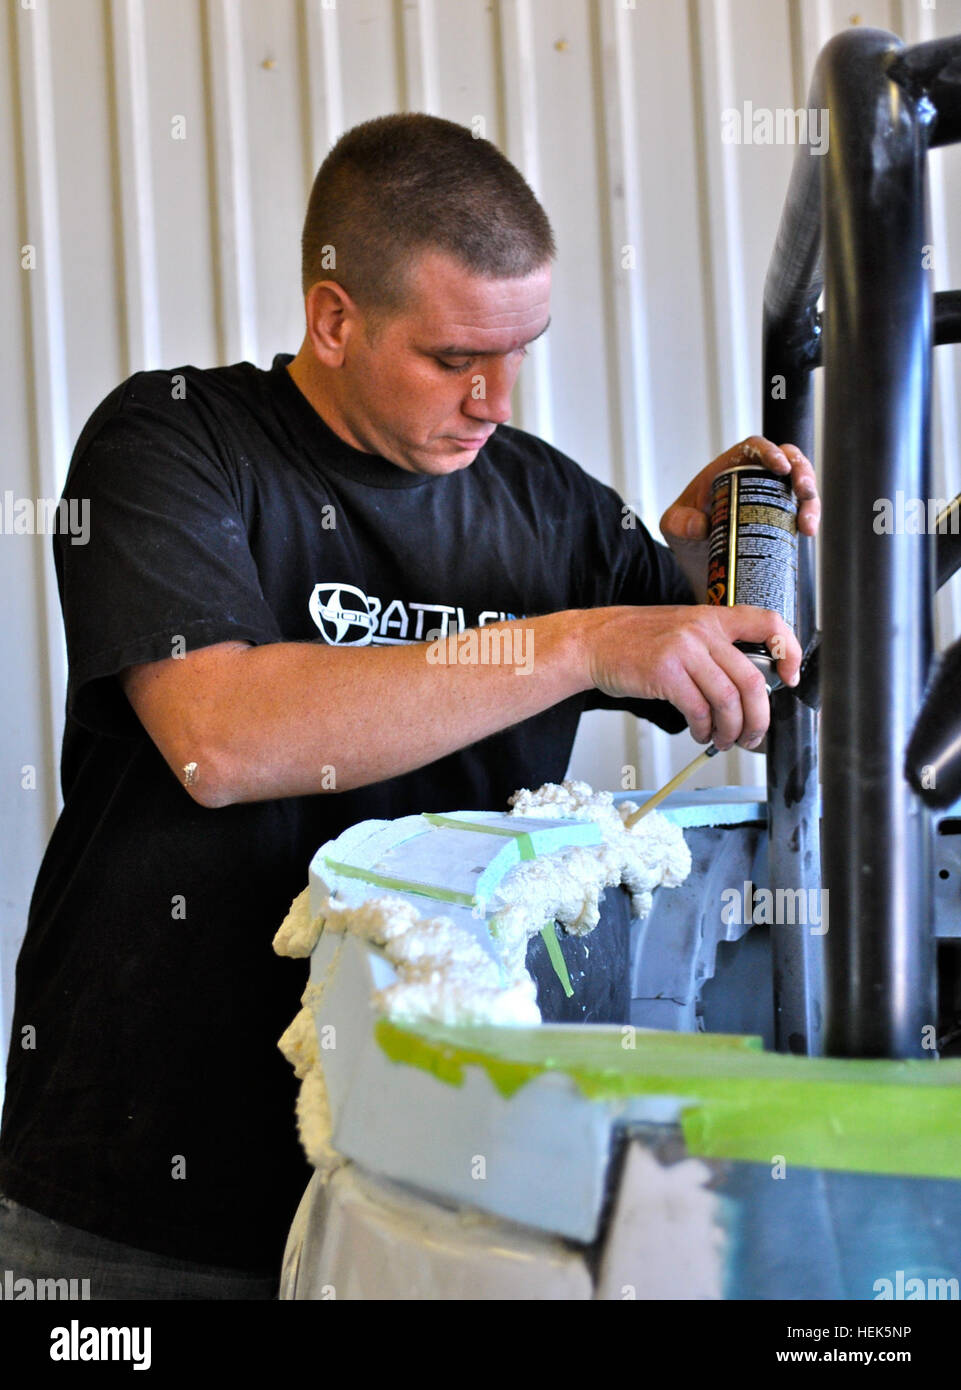 Pfc. Nathaniel Machowski, a native of Denver, Colo. and a combat engineer assigned to the 55th Mobility Augmentation Company, 4th Maneuver Enhancement Brigade on Fort Leonard Wood, Mo., builds a foam mold in preparation of fiberglass on a Scion xB. Machowski is part of Team Sapper, one of three finalists in the Toyota - Battle of the Builds 2010, a competition in which each team will design a custom vehicle using the Scion xB and $15,000. Five Combat Engineers, One Scion XB and $15,000 Equal Winning Team 316709 Stock Photo